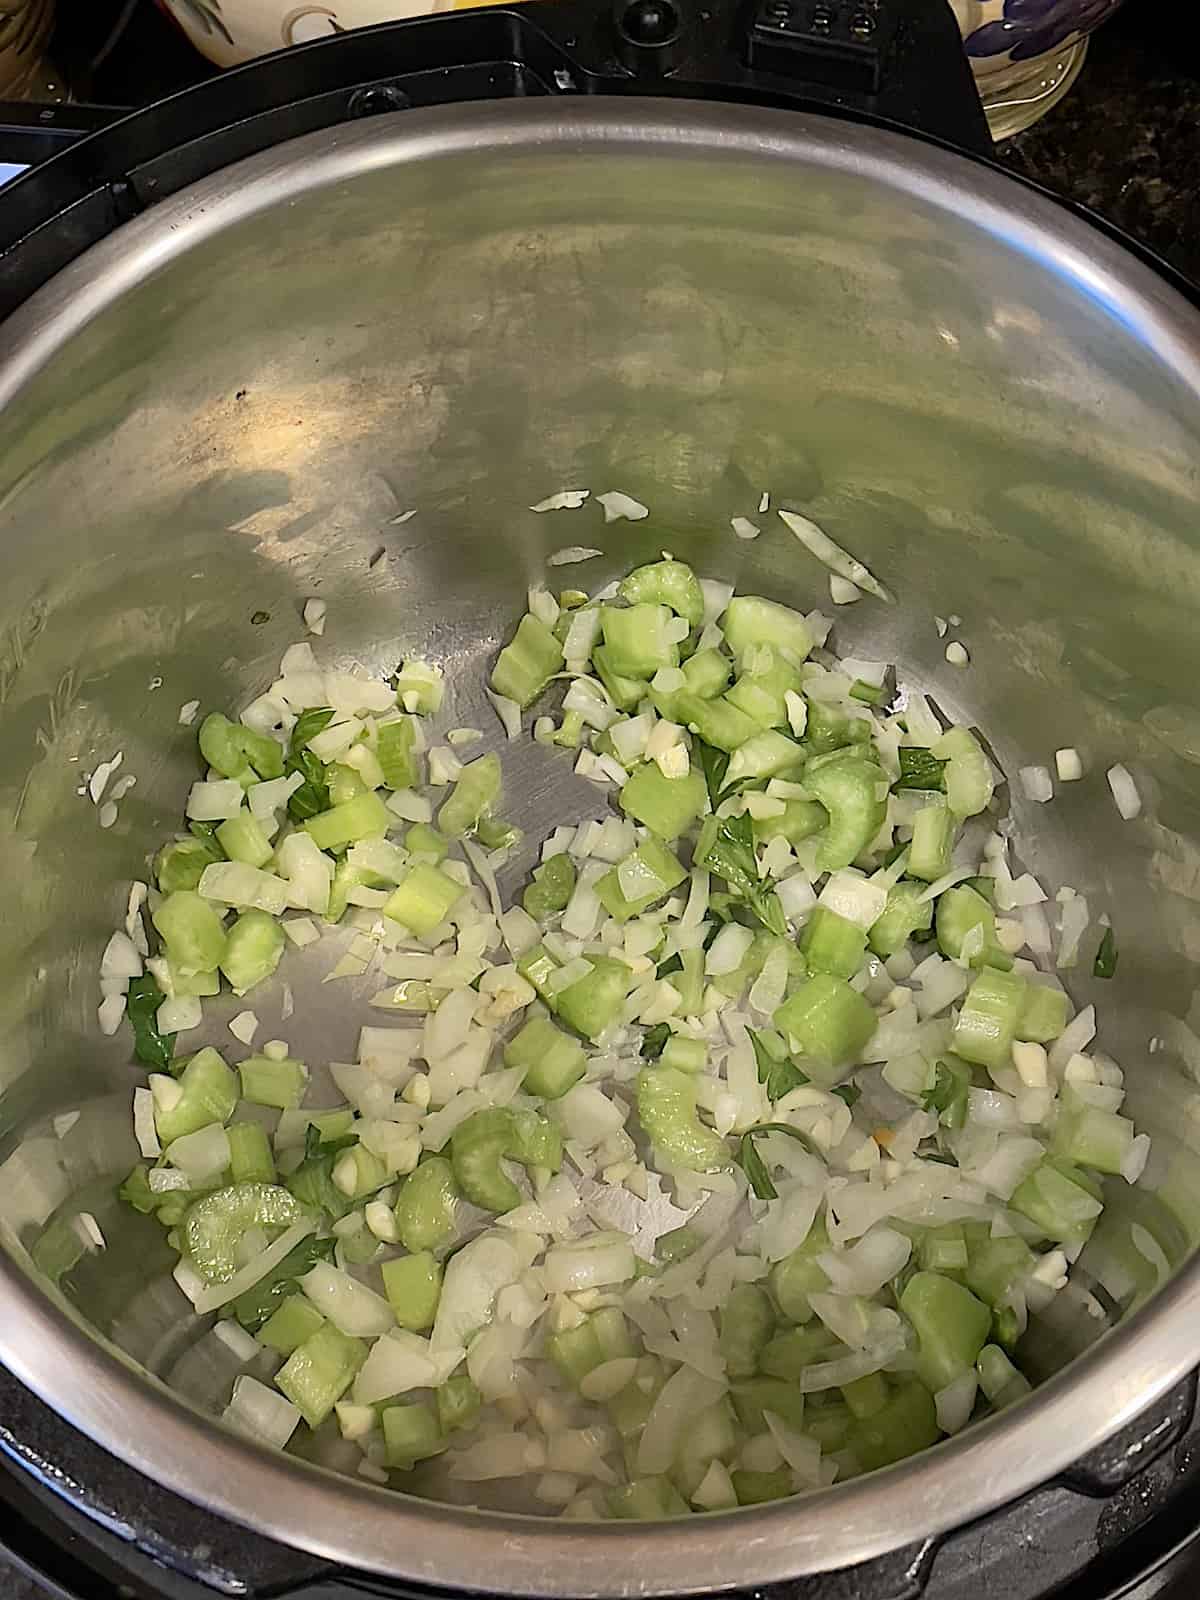 onions, celery and garlic cooking in the pressure cooker